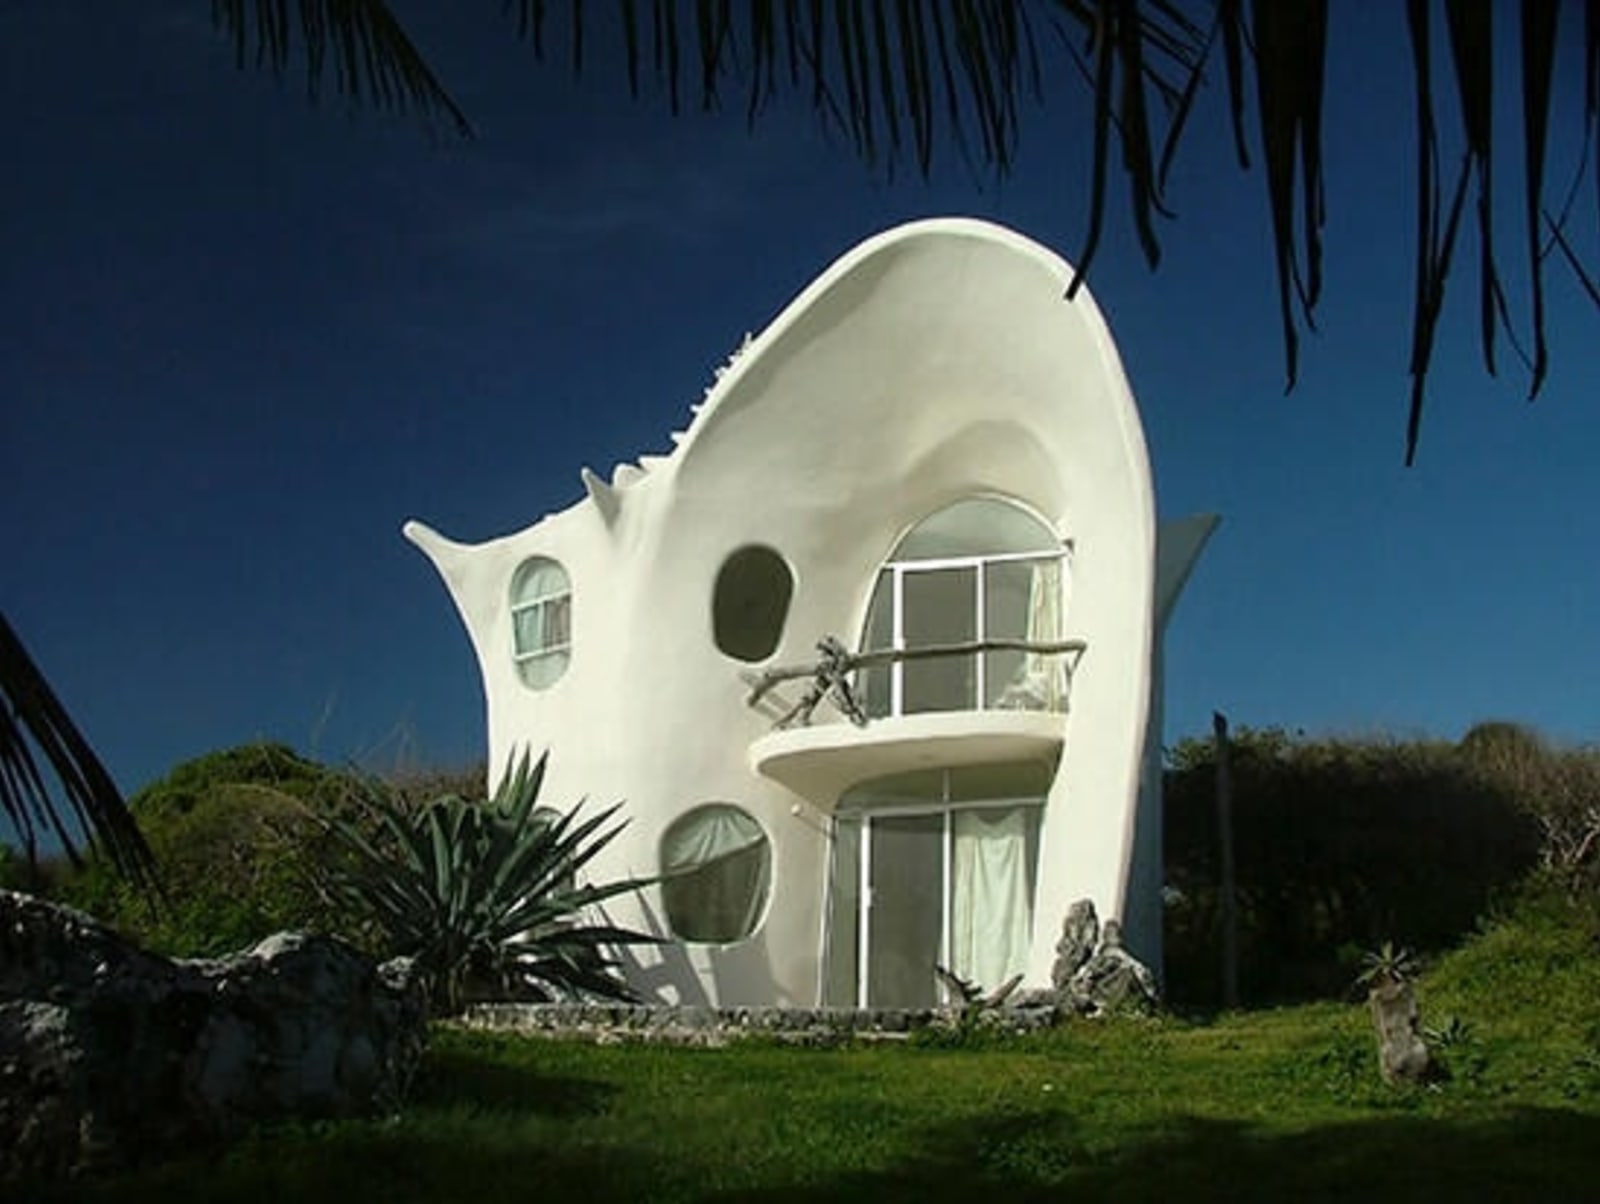 rs-conch-shell-house-mexico-shutterstock481440.jpg